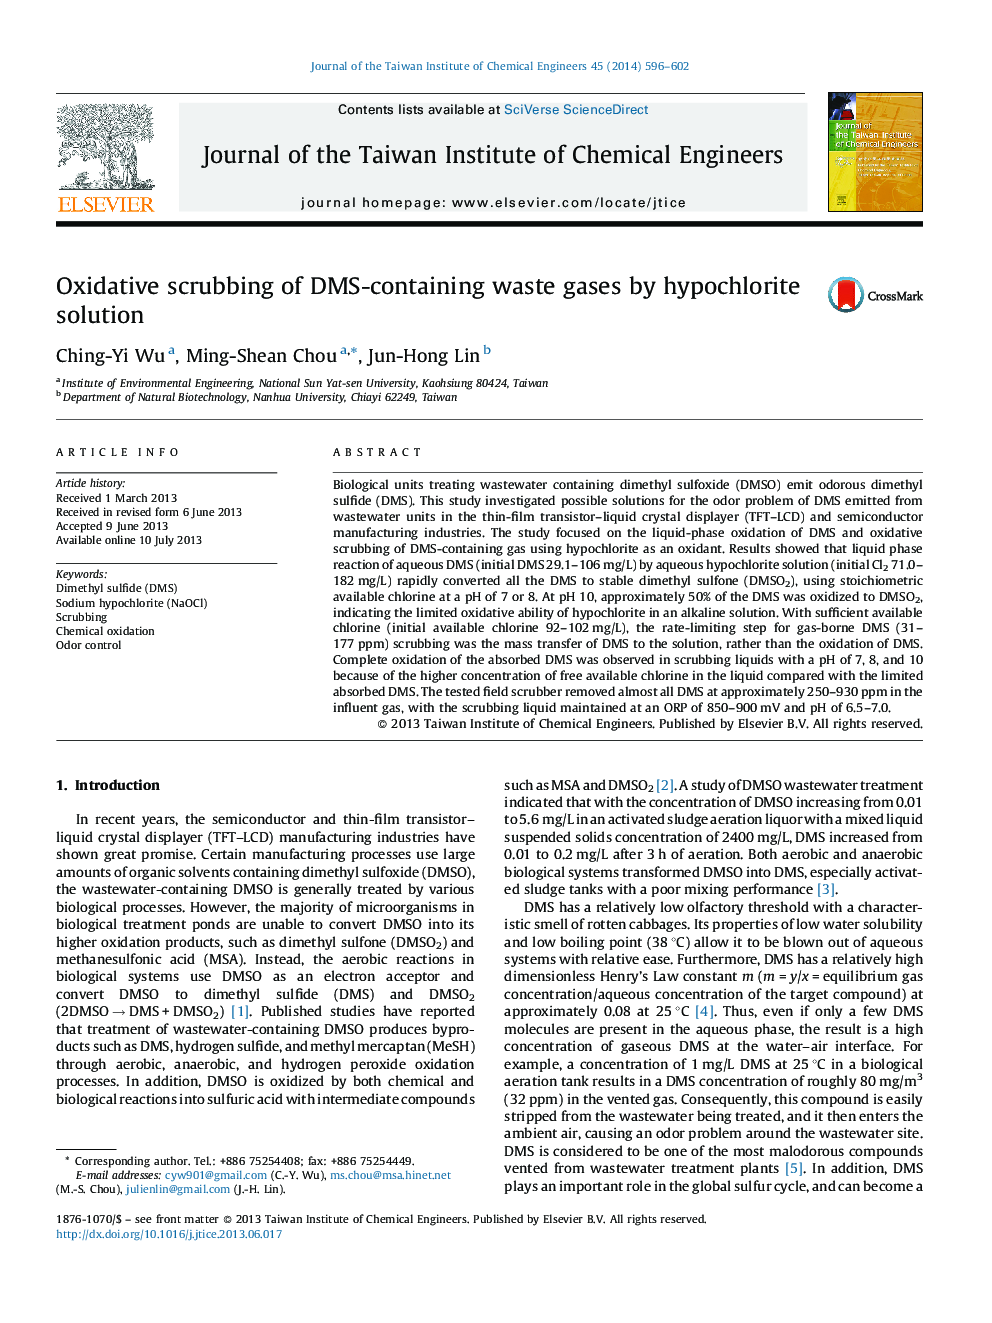 Oxidative scrubbing of DMS-containing waste gases by hypochlorite solution